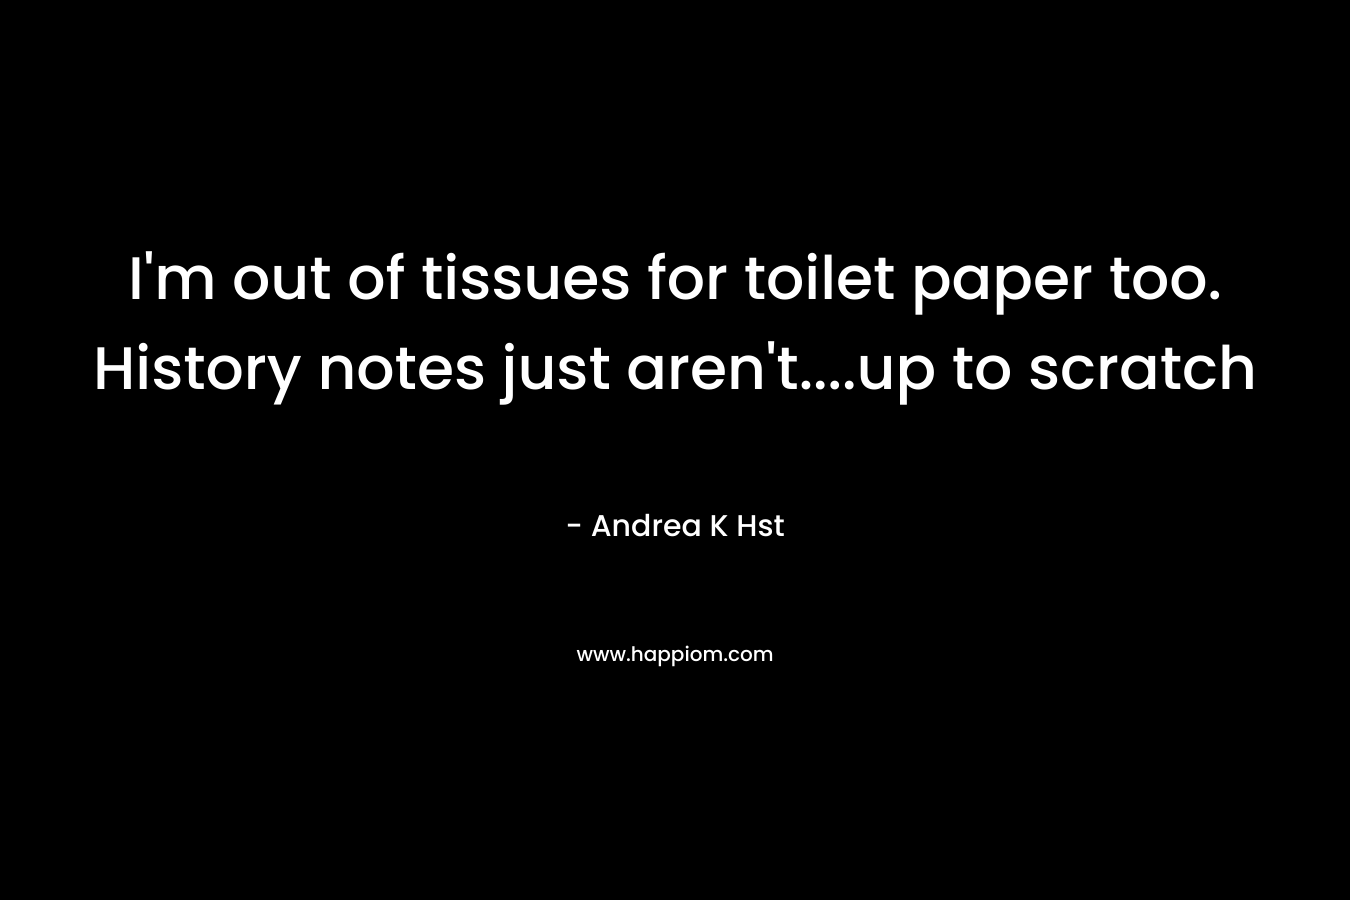 I'm out of tissues for toilet paper too. History notes just aren't....up to scratch